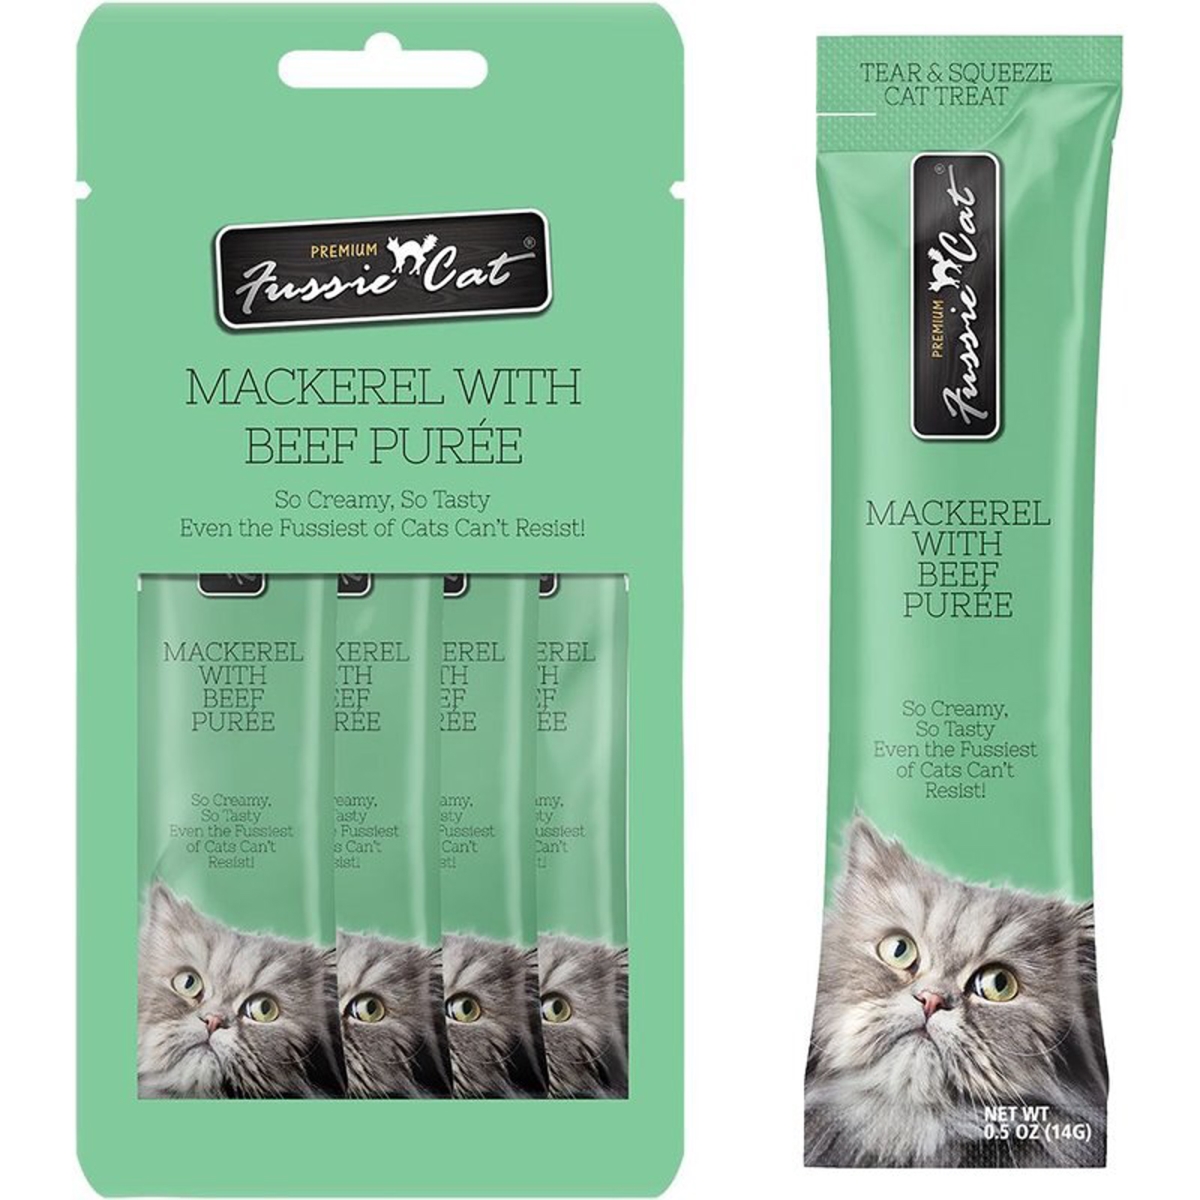 Picture of Fussie Cat 888641139200 2 oz Mackerel Cat Treat with Beef Puree - 18 Count